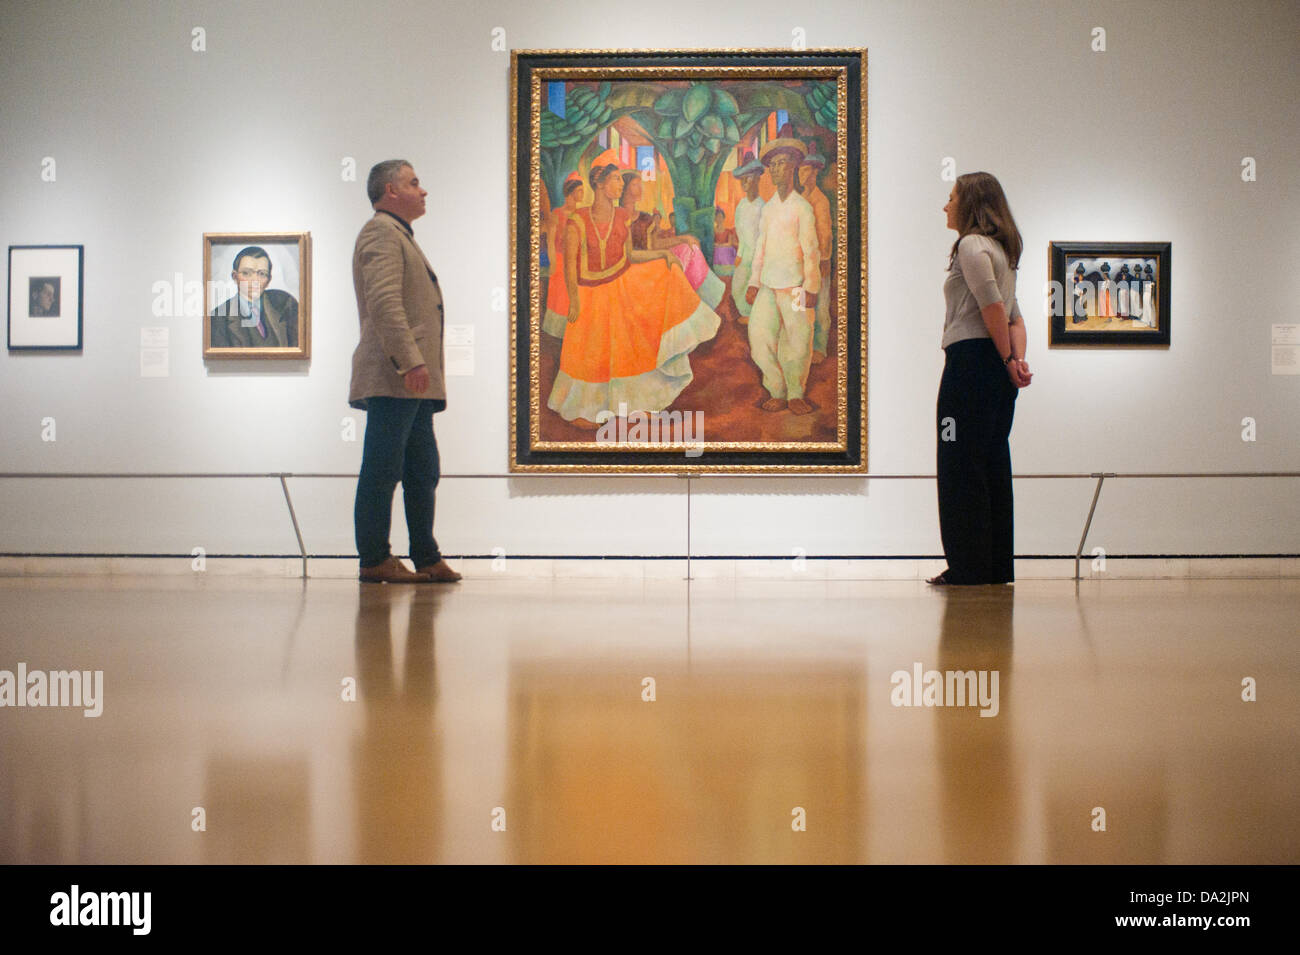 London, UK - 2 July 2013: curator Dr Adrian Locke and a Royal Academy of Arts employee stand next to a work by Diego Rivera entitled 'Dance in Tehuantepec, 1928' at the exhibition 'Mexico: A Revolution in Art, 1910–1940' which opens on the 6th of July. The show features over 120 paintings and photographs and examines the intense period of artistic creativity that took place in Mexico at the beginning of the 20th century. Credit:  Piero Cruciatti/Alamy Live News Stock Photo